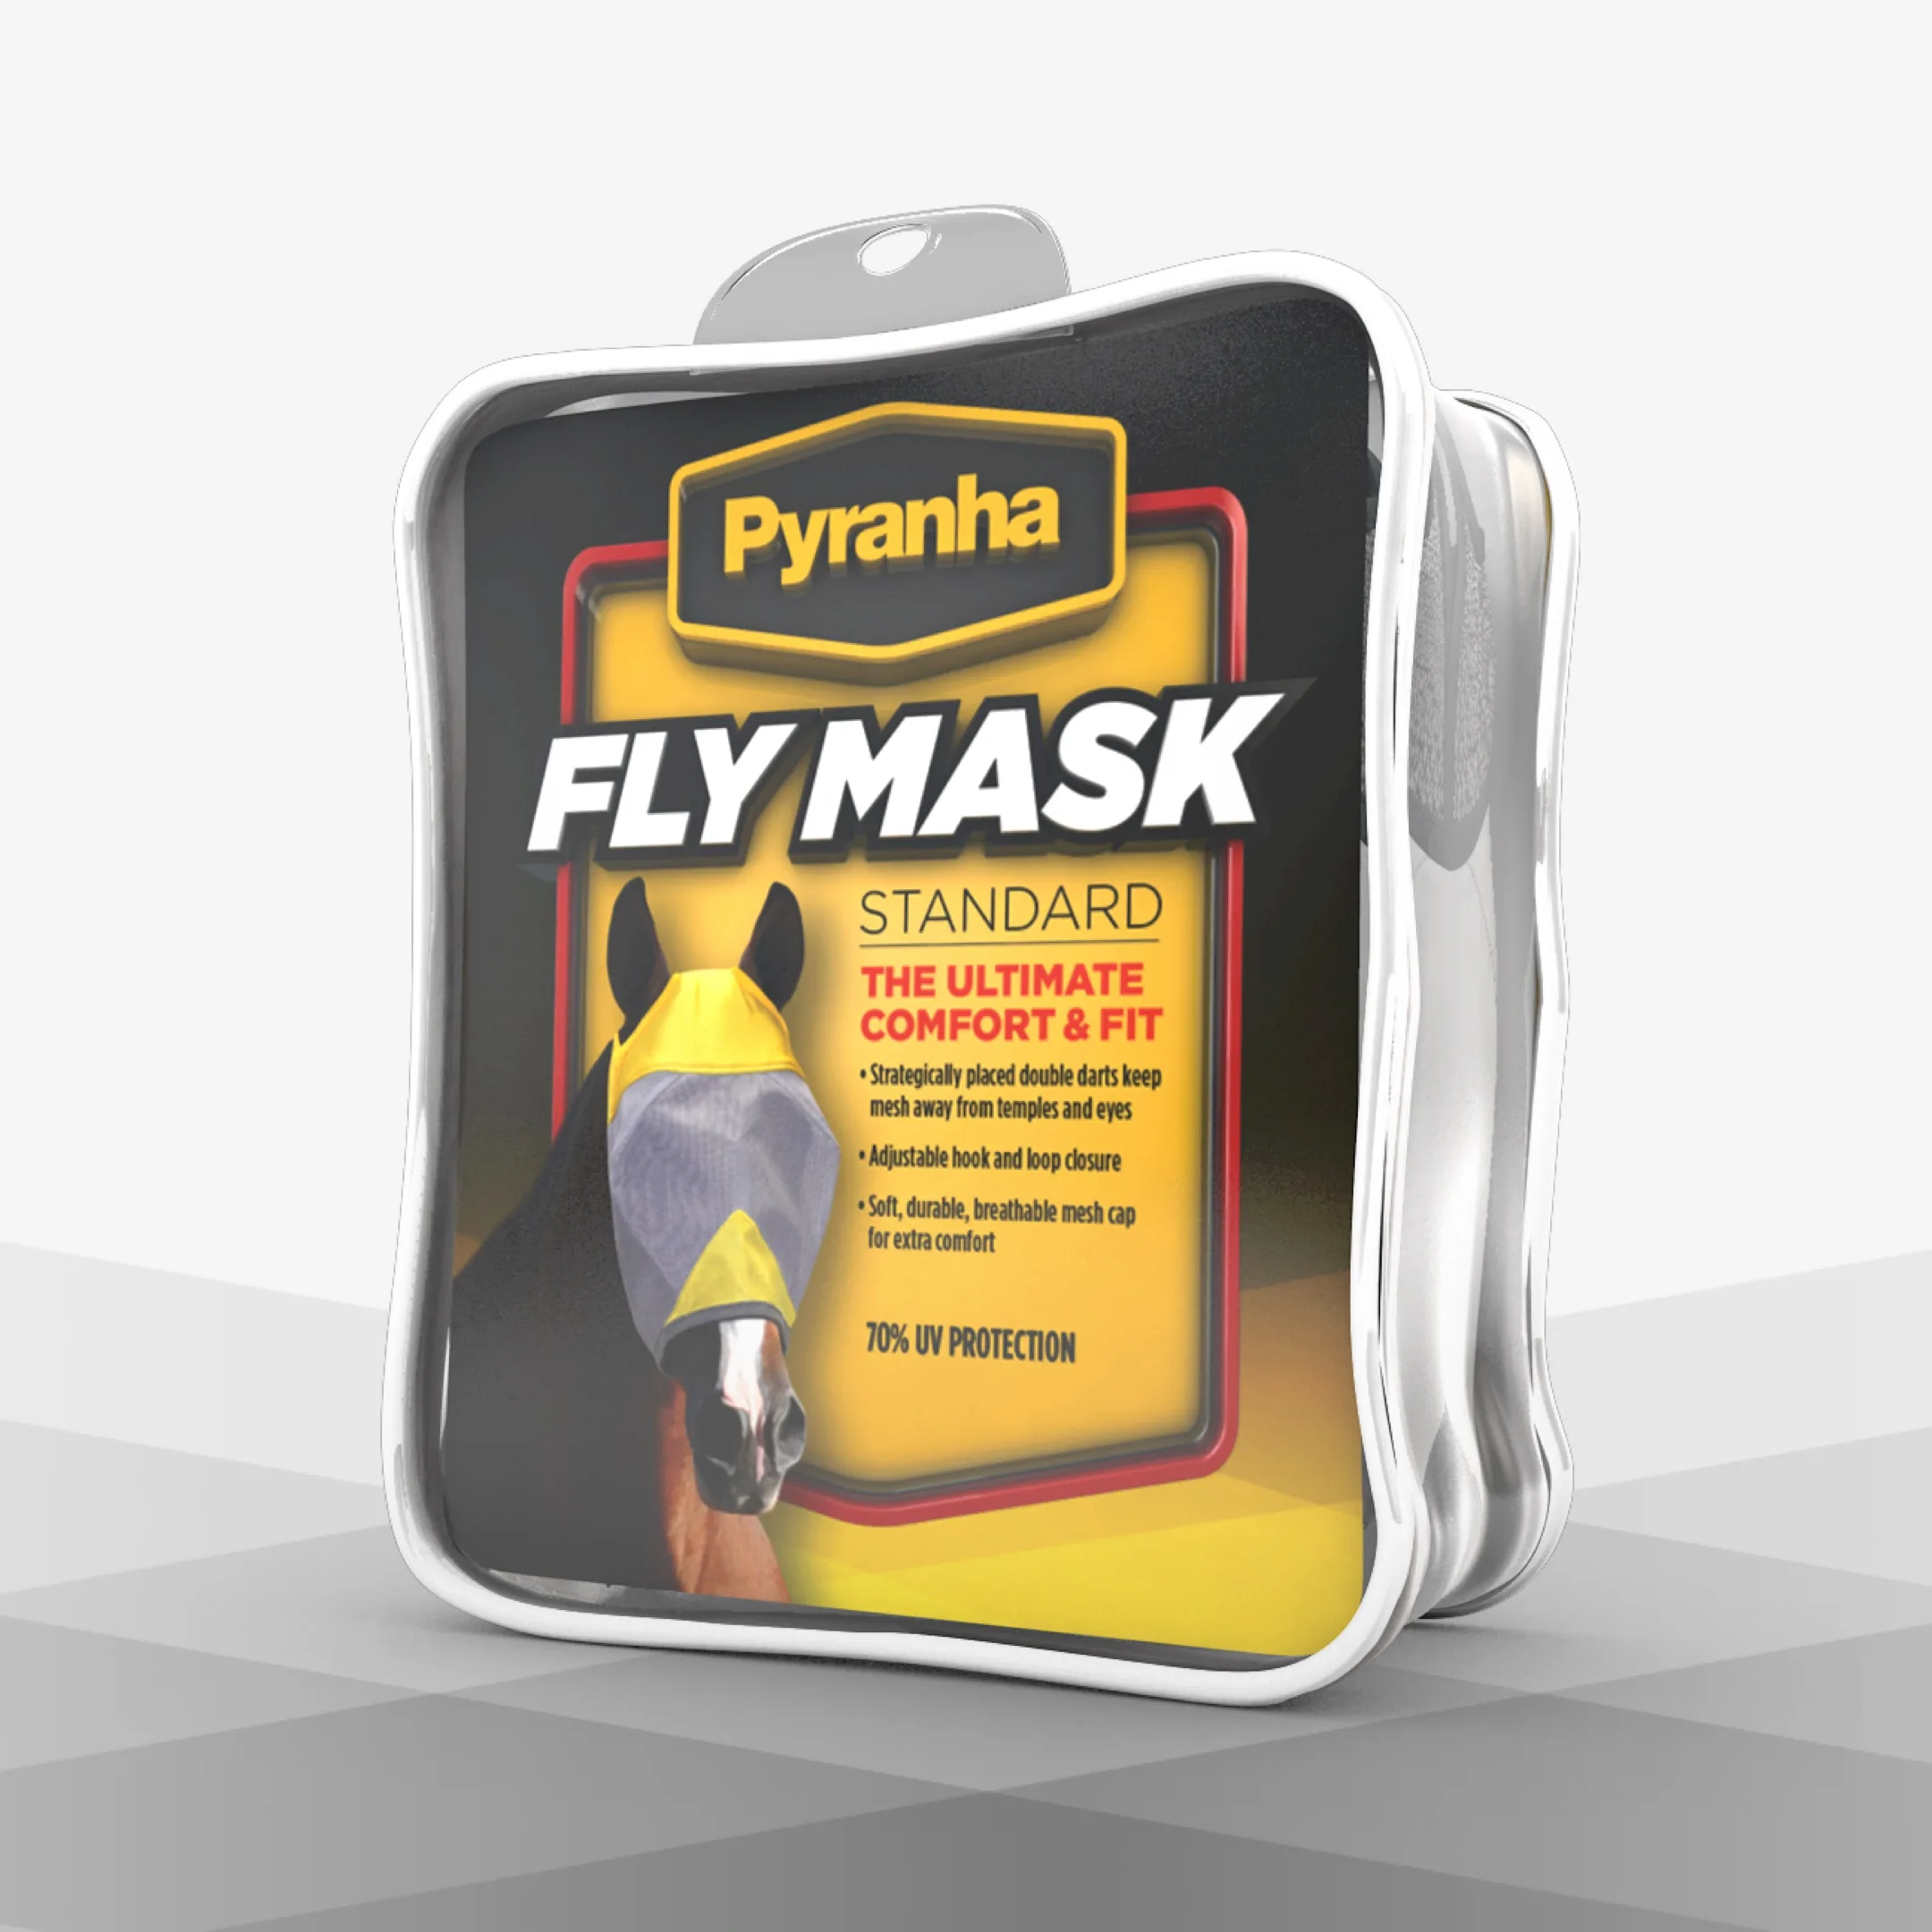 Pyranha - graphic design, product packaging design, marketing and advertising